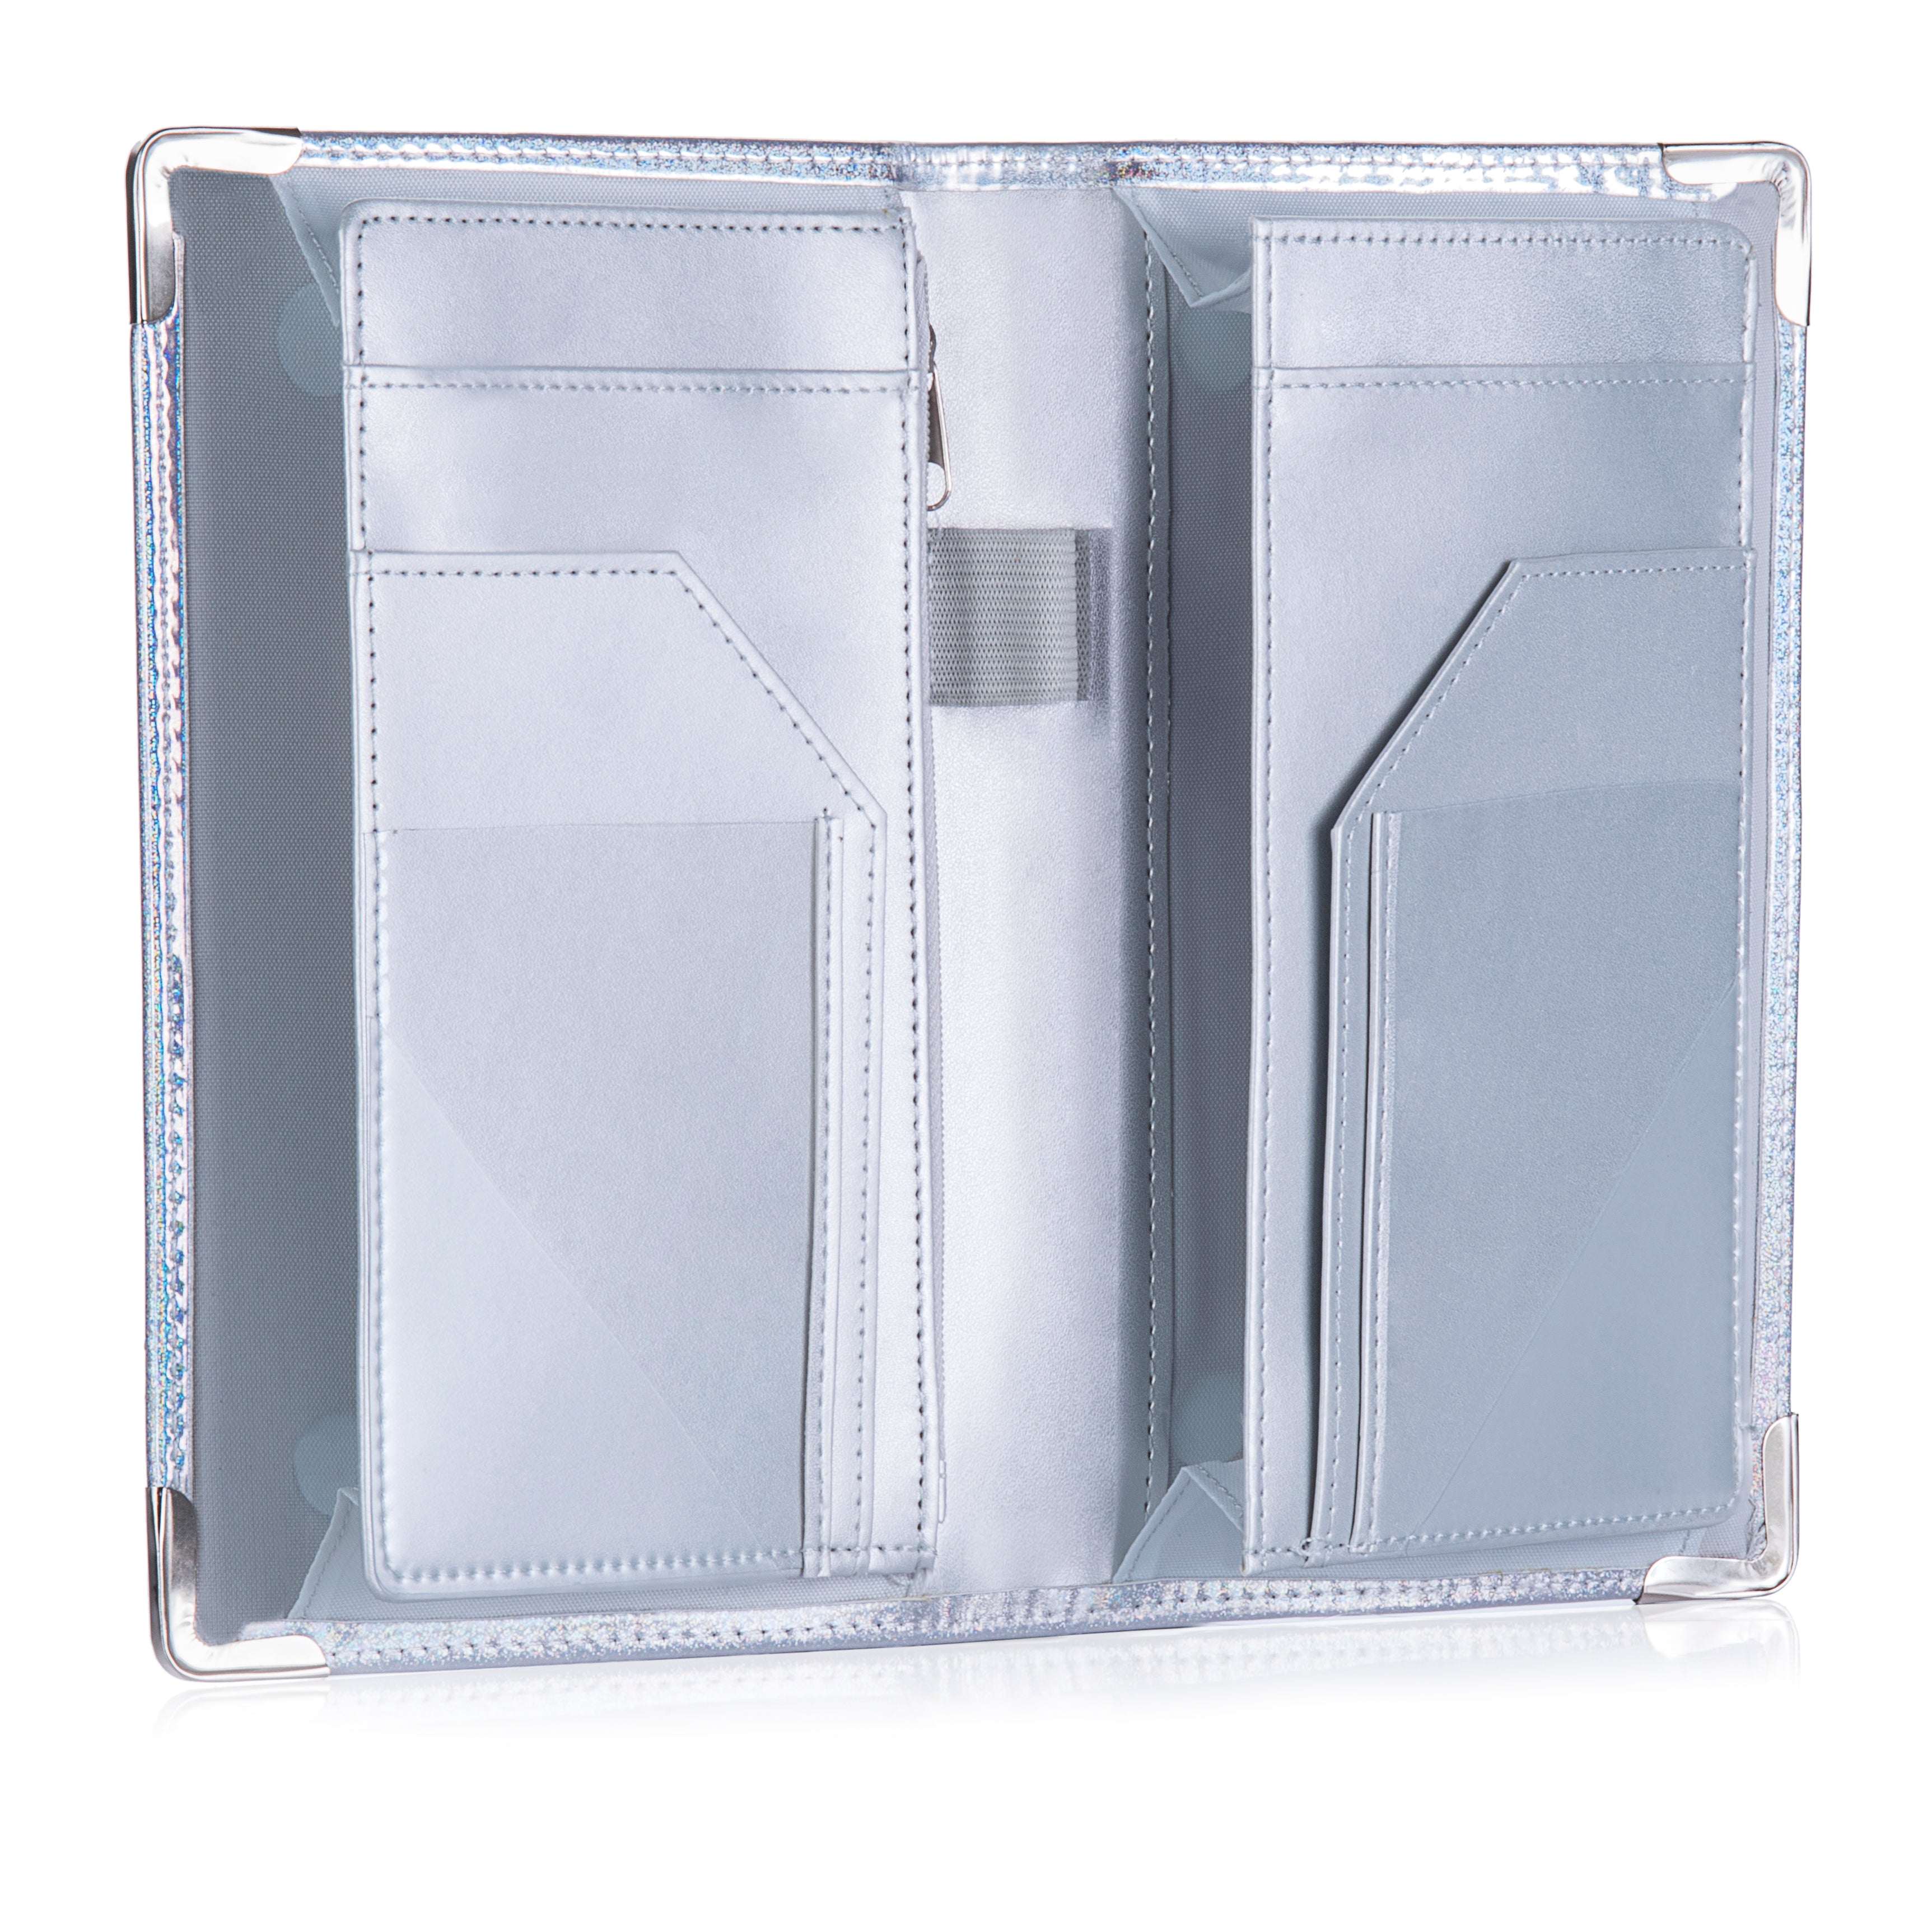 Sonic Server 11-Pocket Holographic 5x8 Server Book Organizer with Double Magnetic Pockets, Zipper Pouch & Pen Holder for Waitress or Waiter | Holographic Silver/Silver